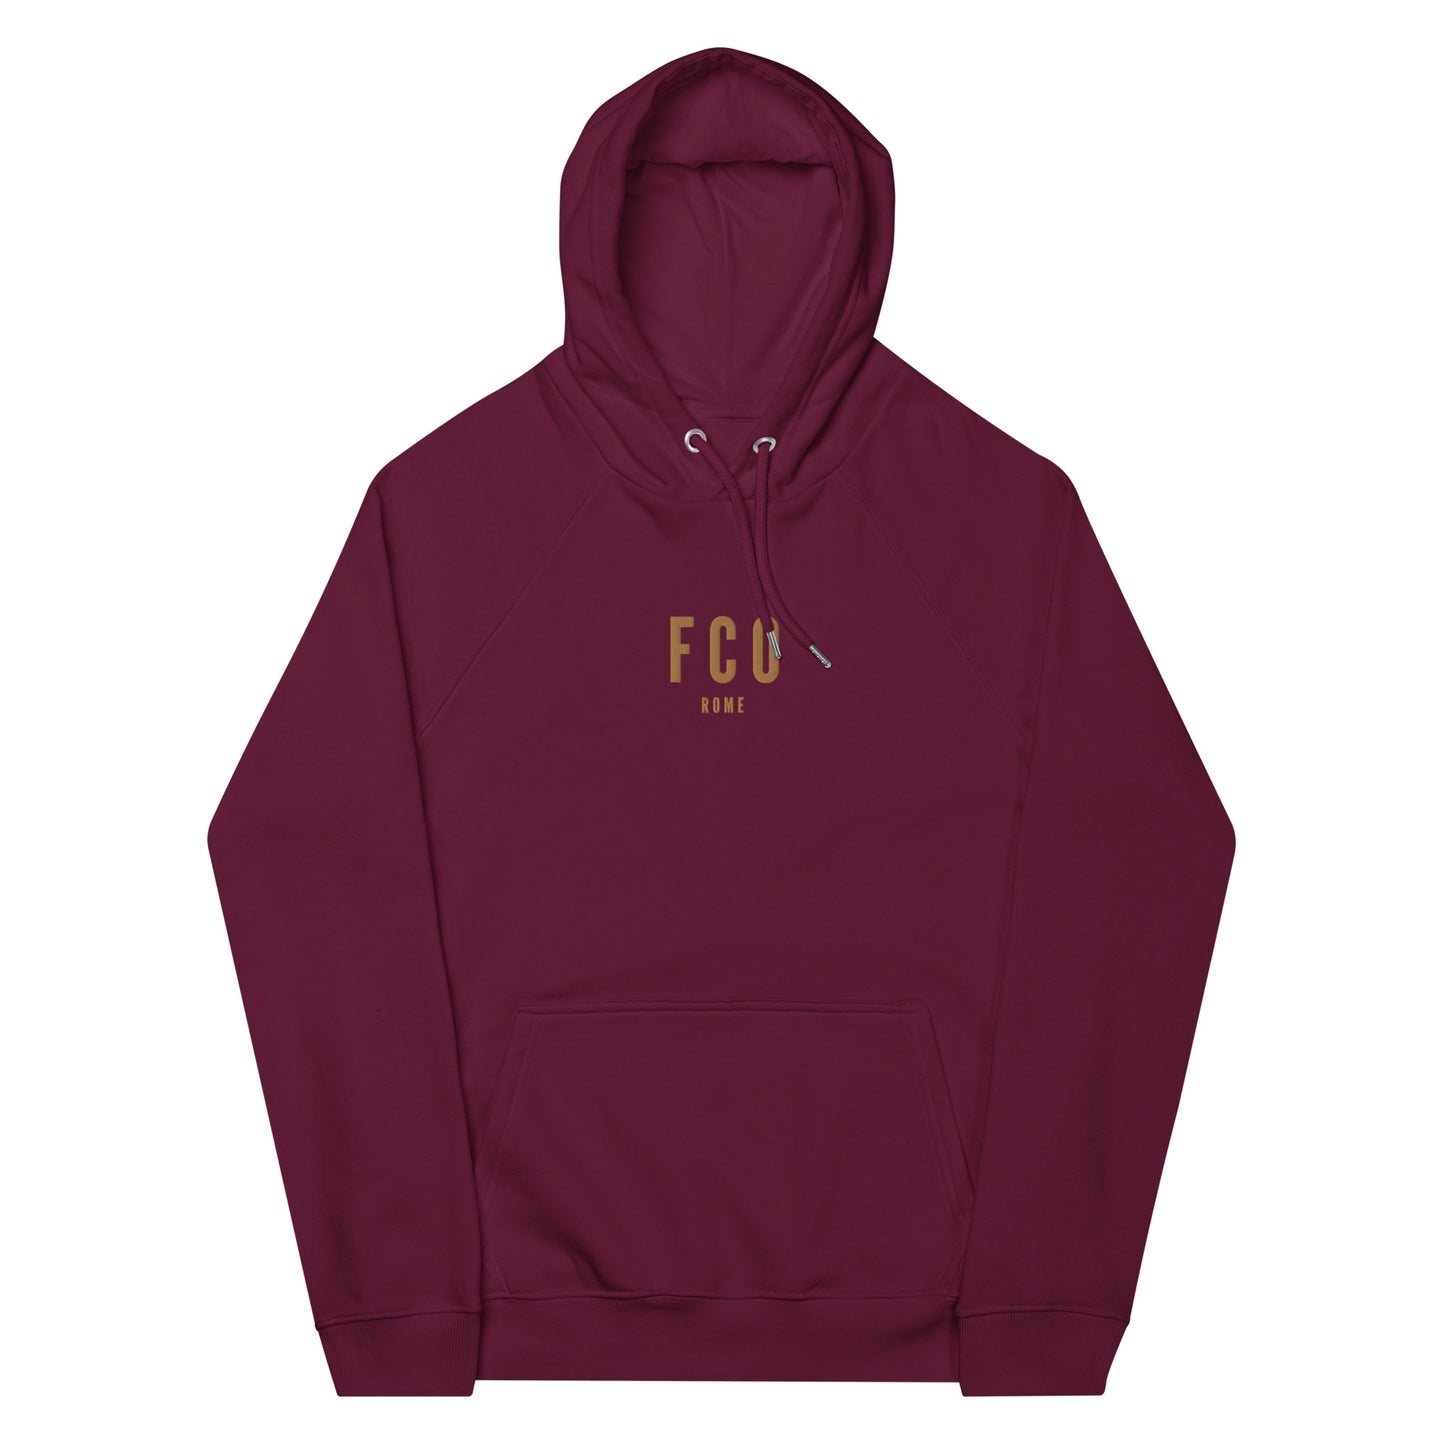 City Organic Hoodie - Old Gold • FCO Rome • YHM Designs - Image 11